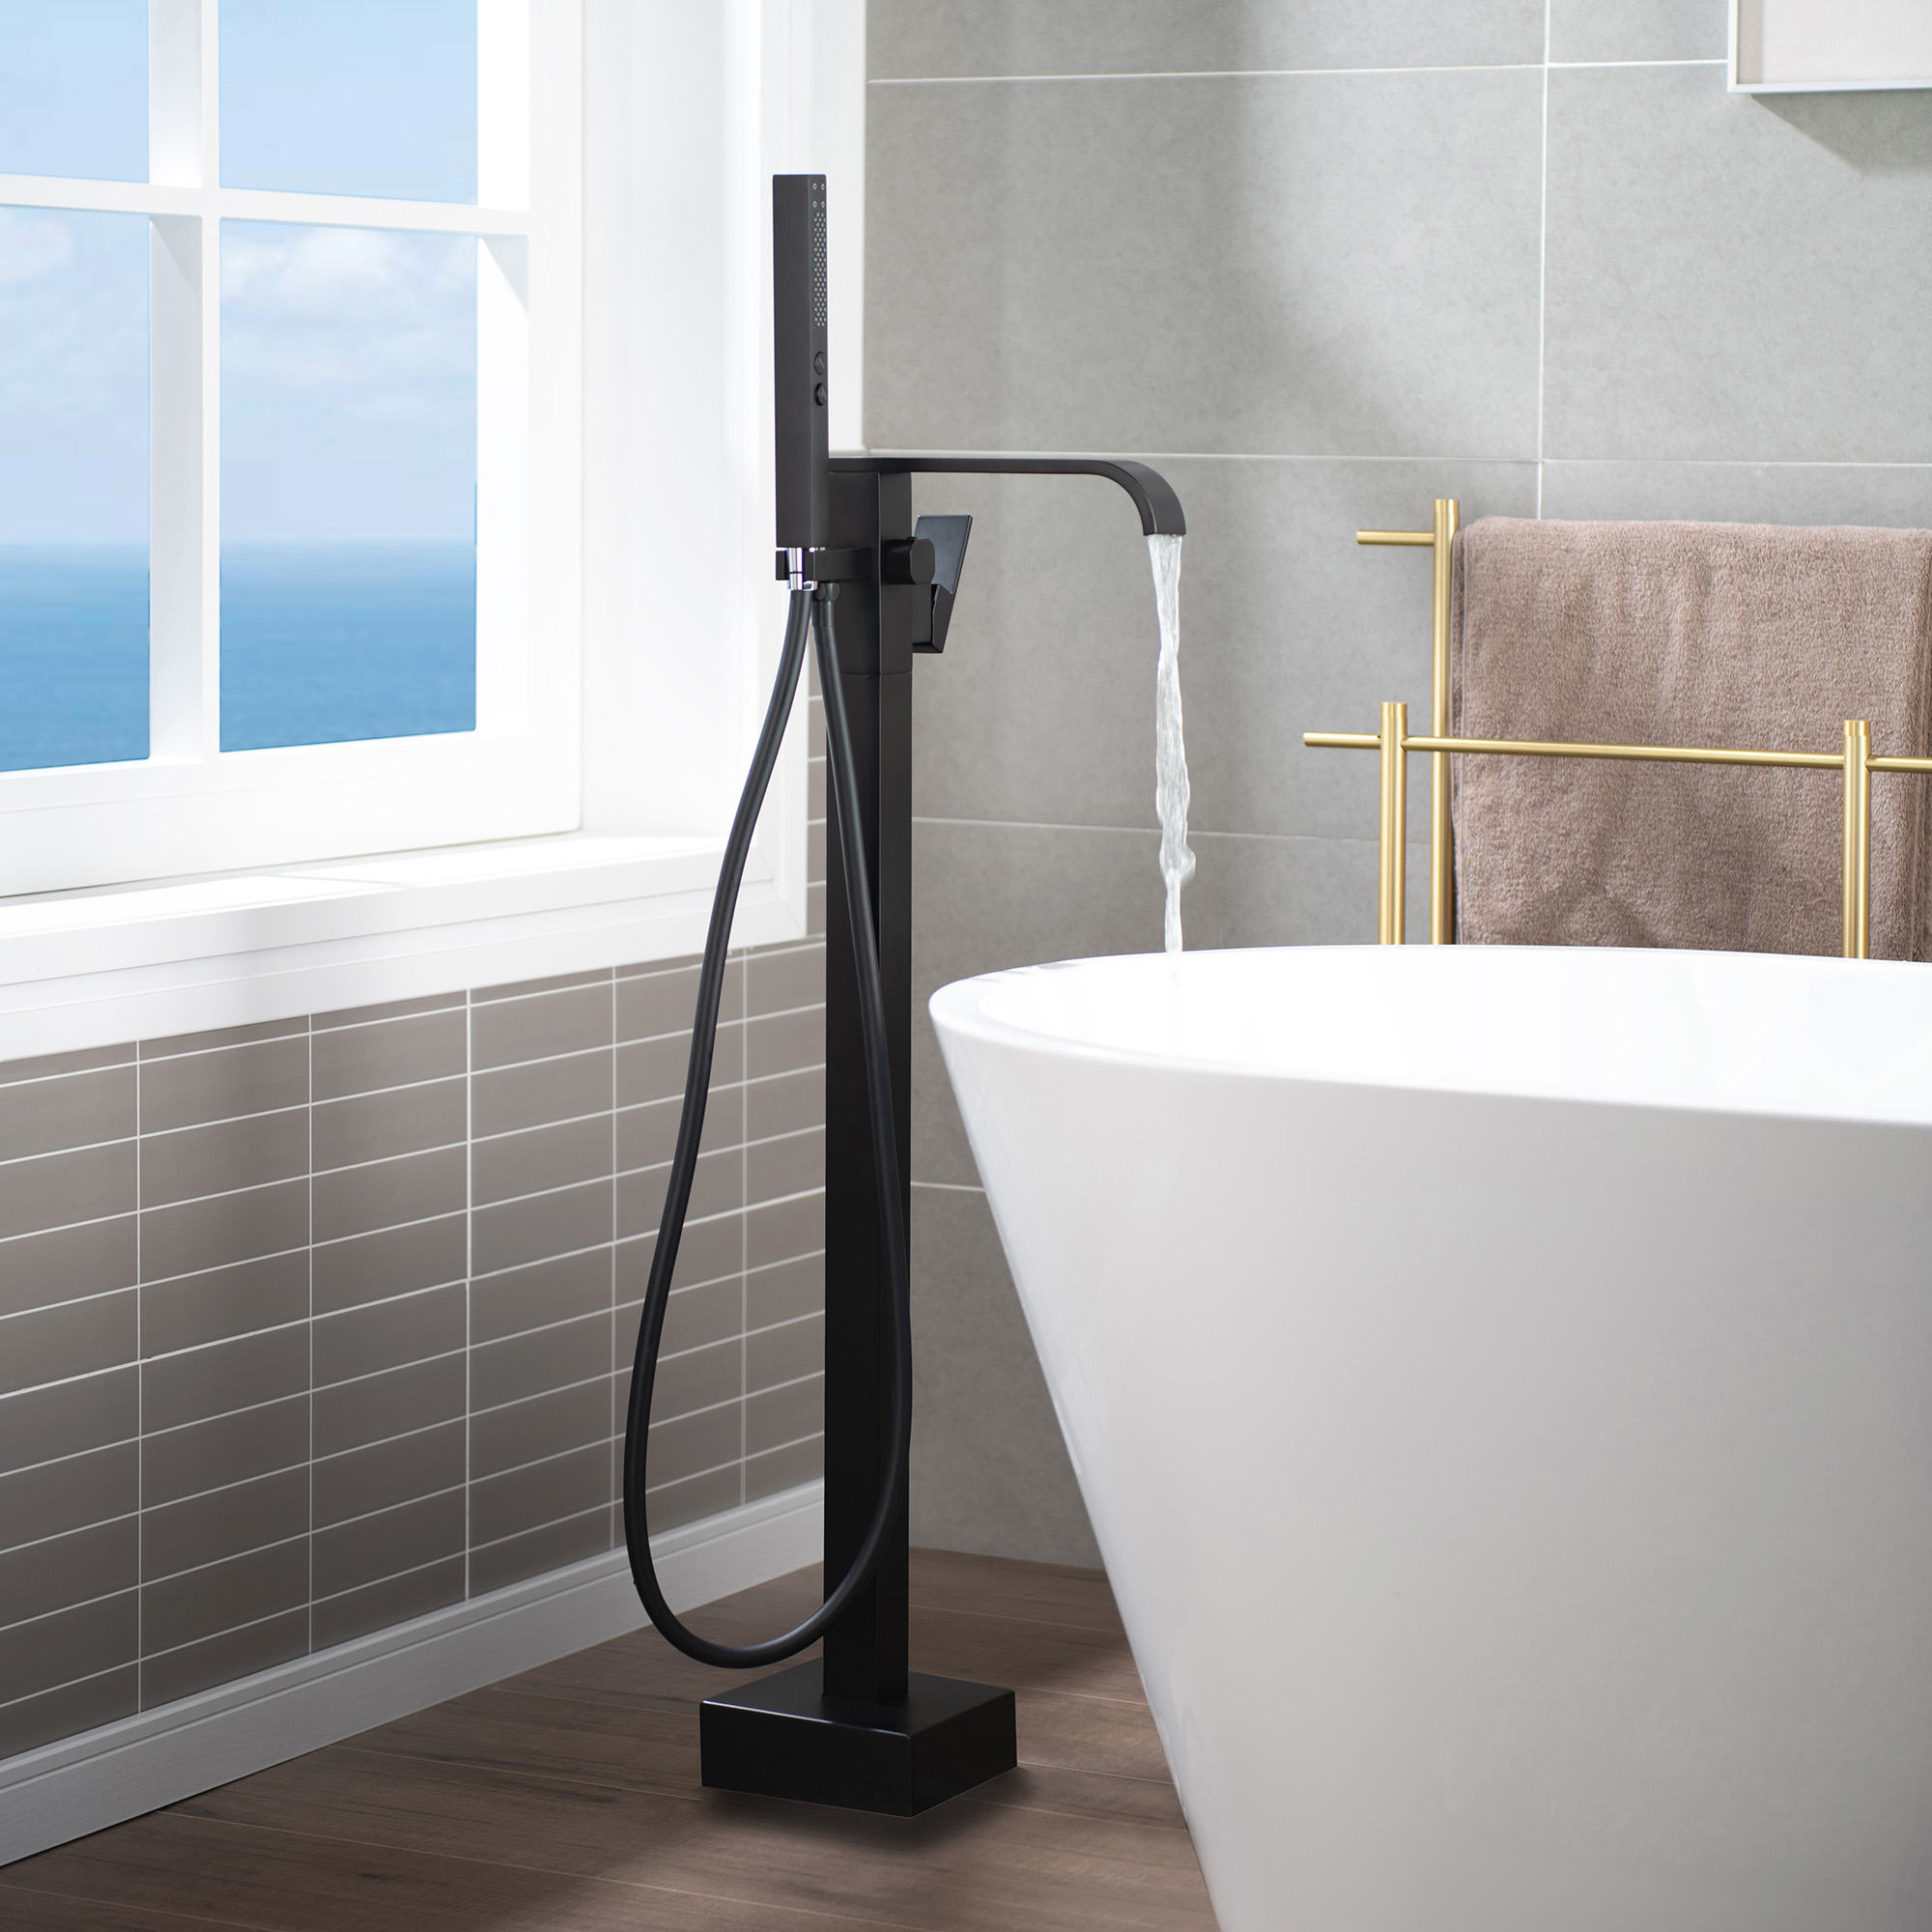  WOODBRIDGE F0037MB Contemporary Single Handle Floor Mount Freestanding Tub Filler Faucet with Hand shower in Matte Black Finish._12240